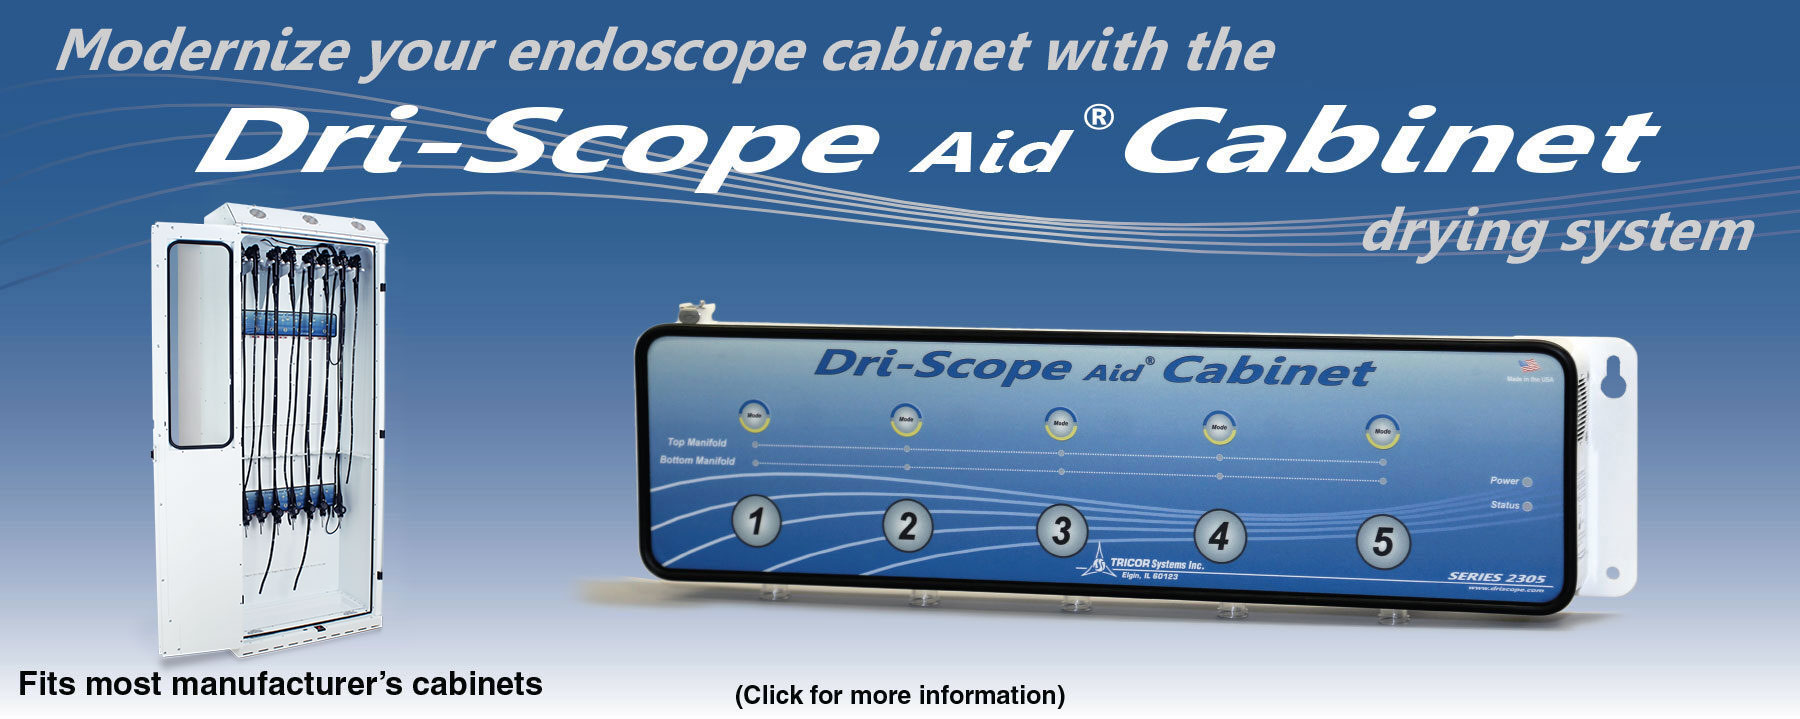 Dri-Scope Aid Cabinet Drying System